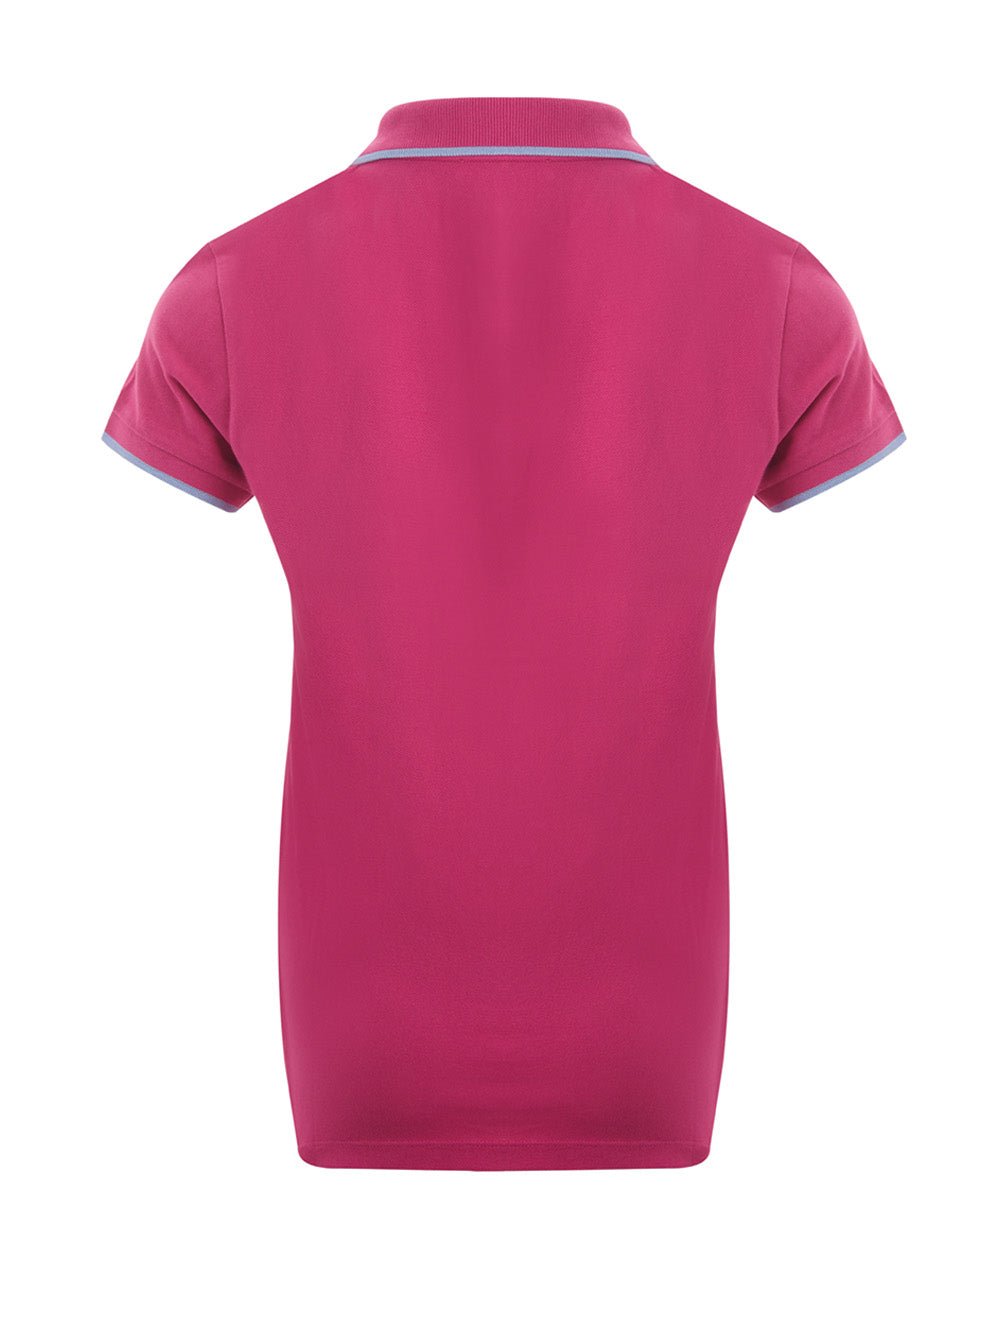 Kenzo Cotton Piquet Polo in Pink with Tiger Embroidery